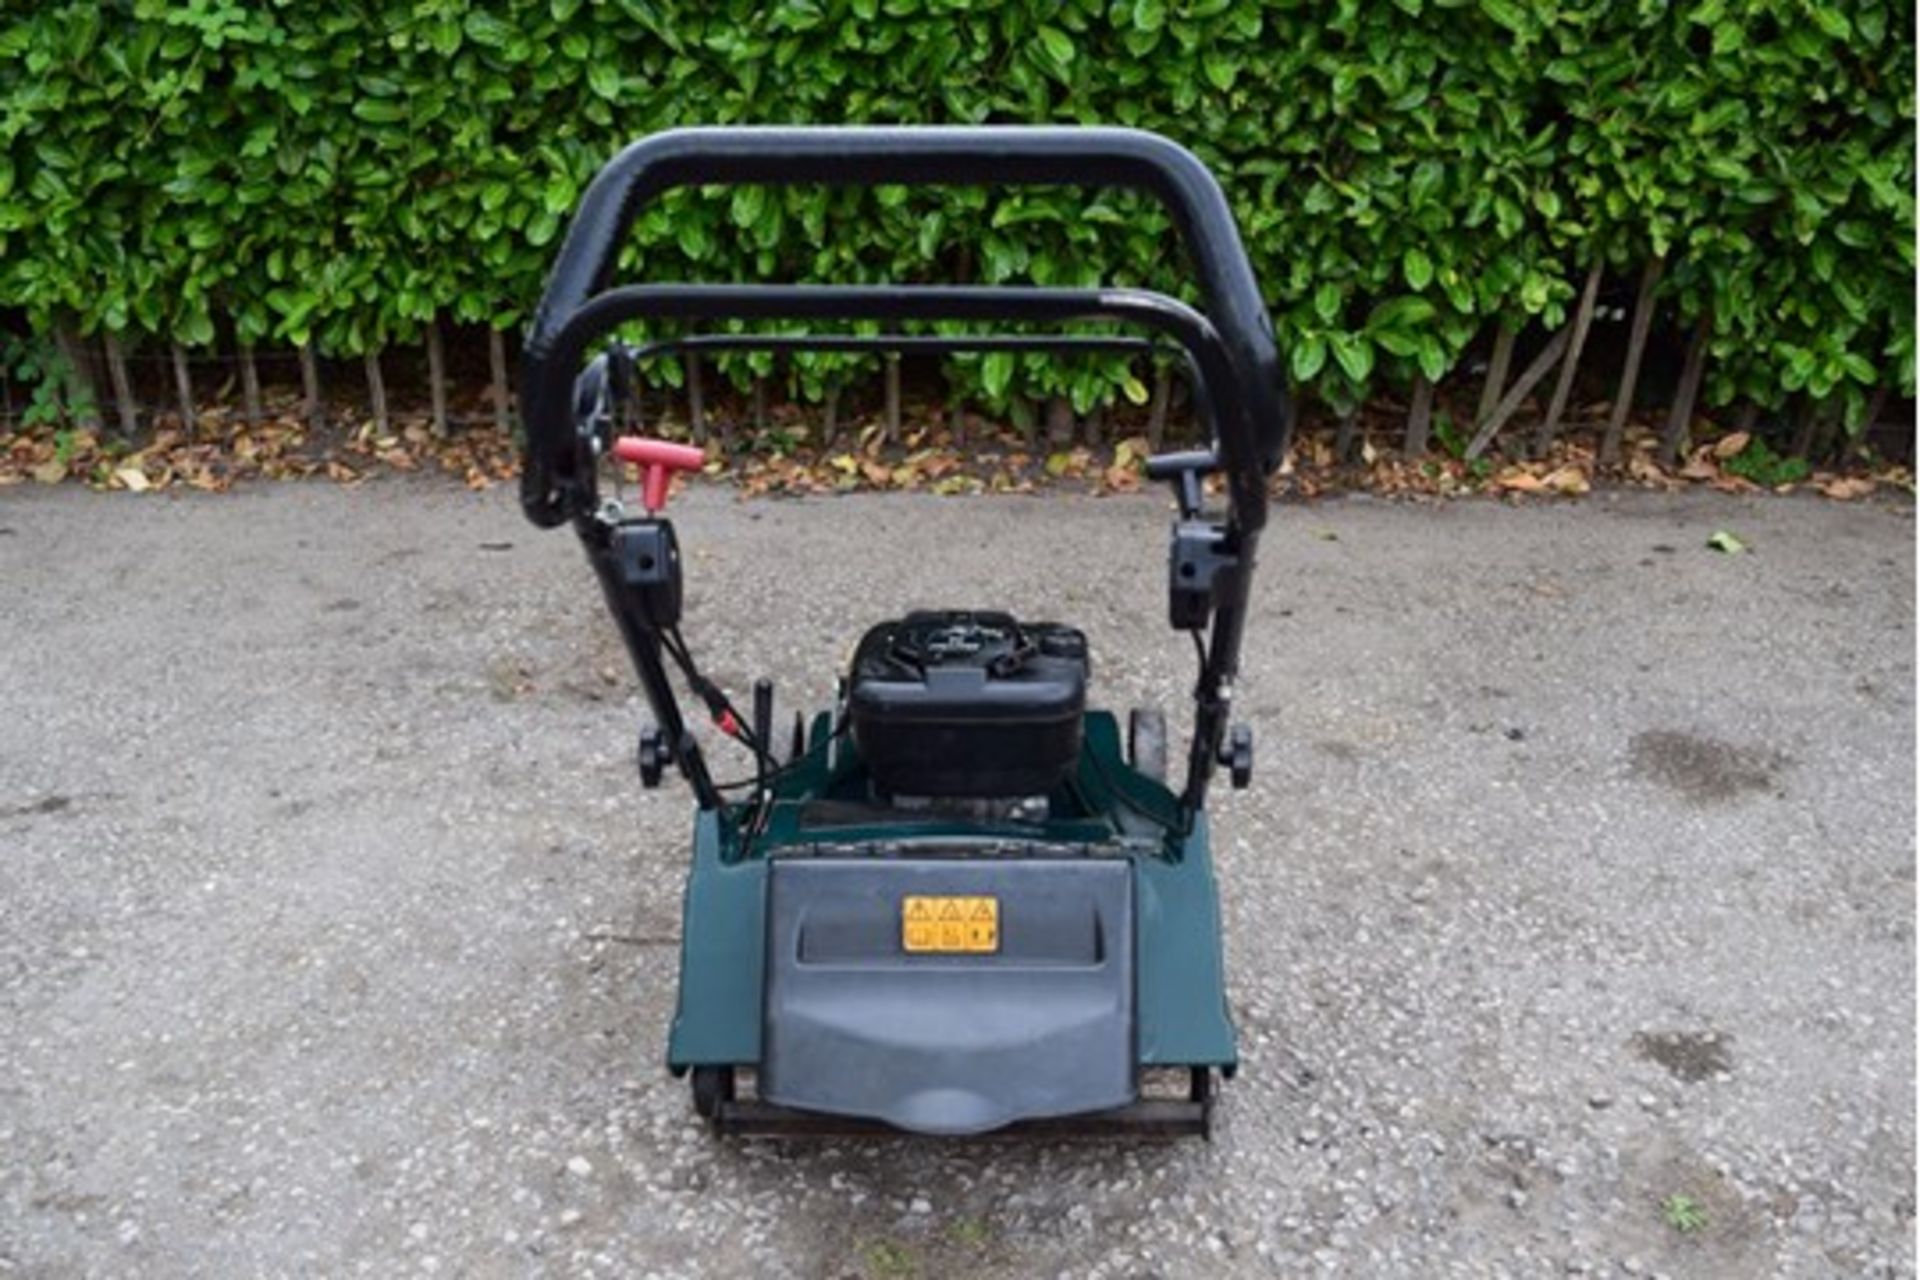 2008 Hayter Harrier 56 Auto Drive Variable Speed 22" Lawn Mower - Image 4 of 6